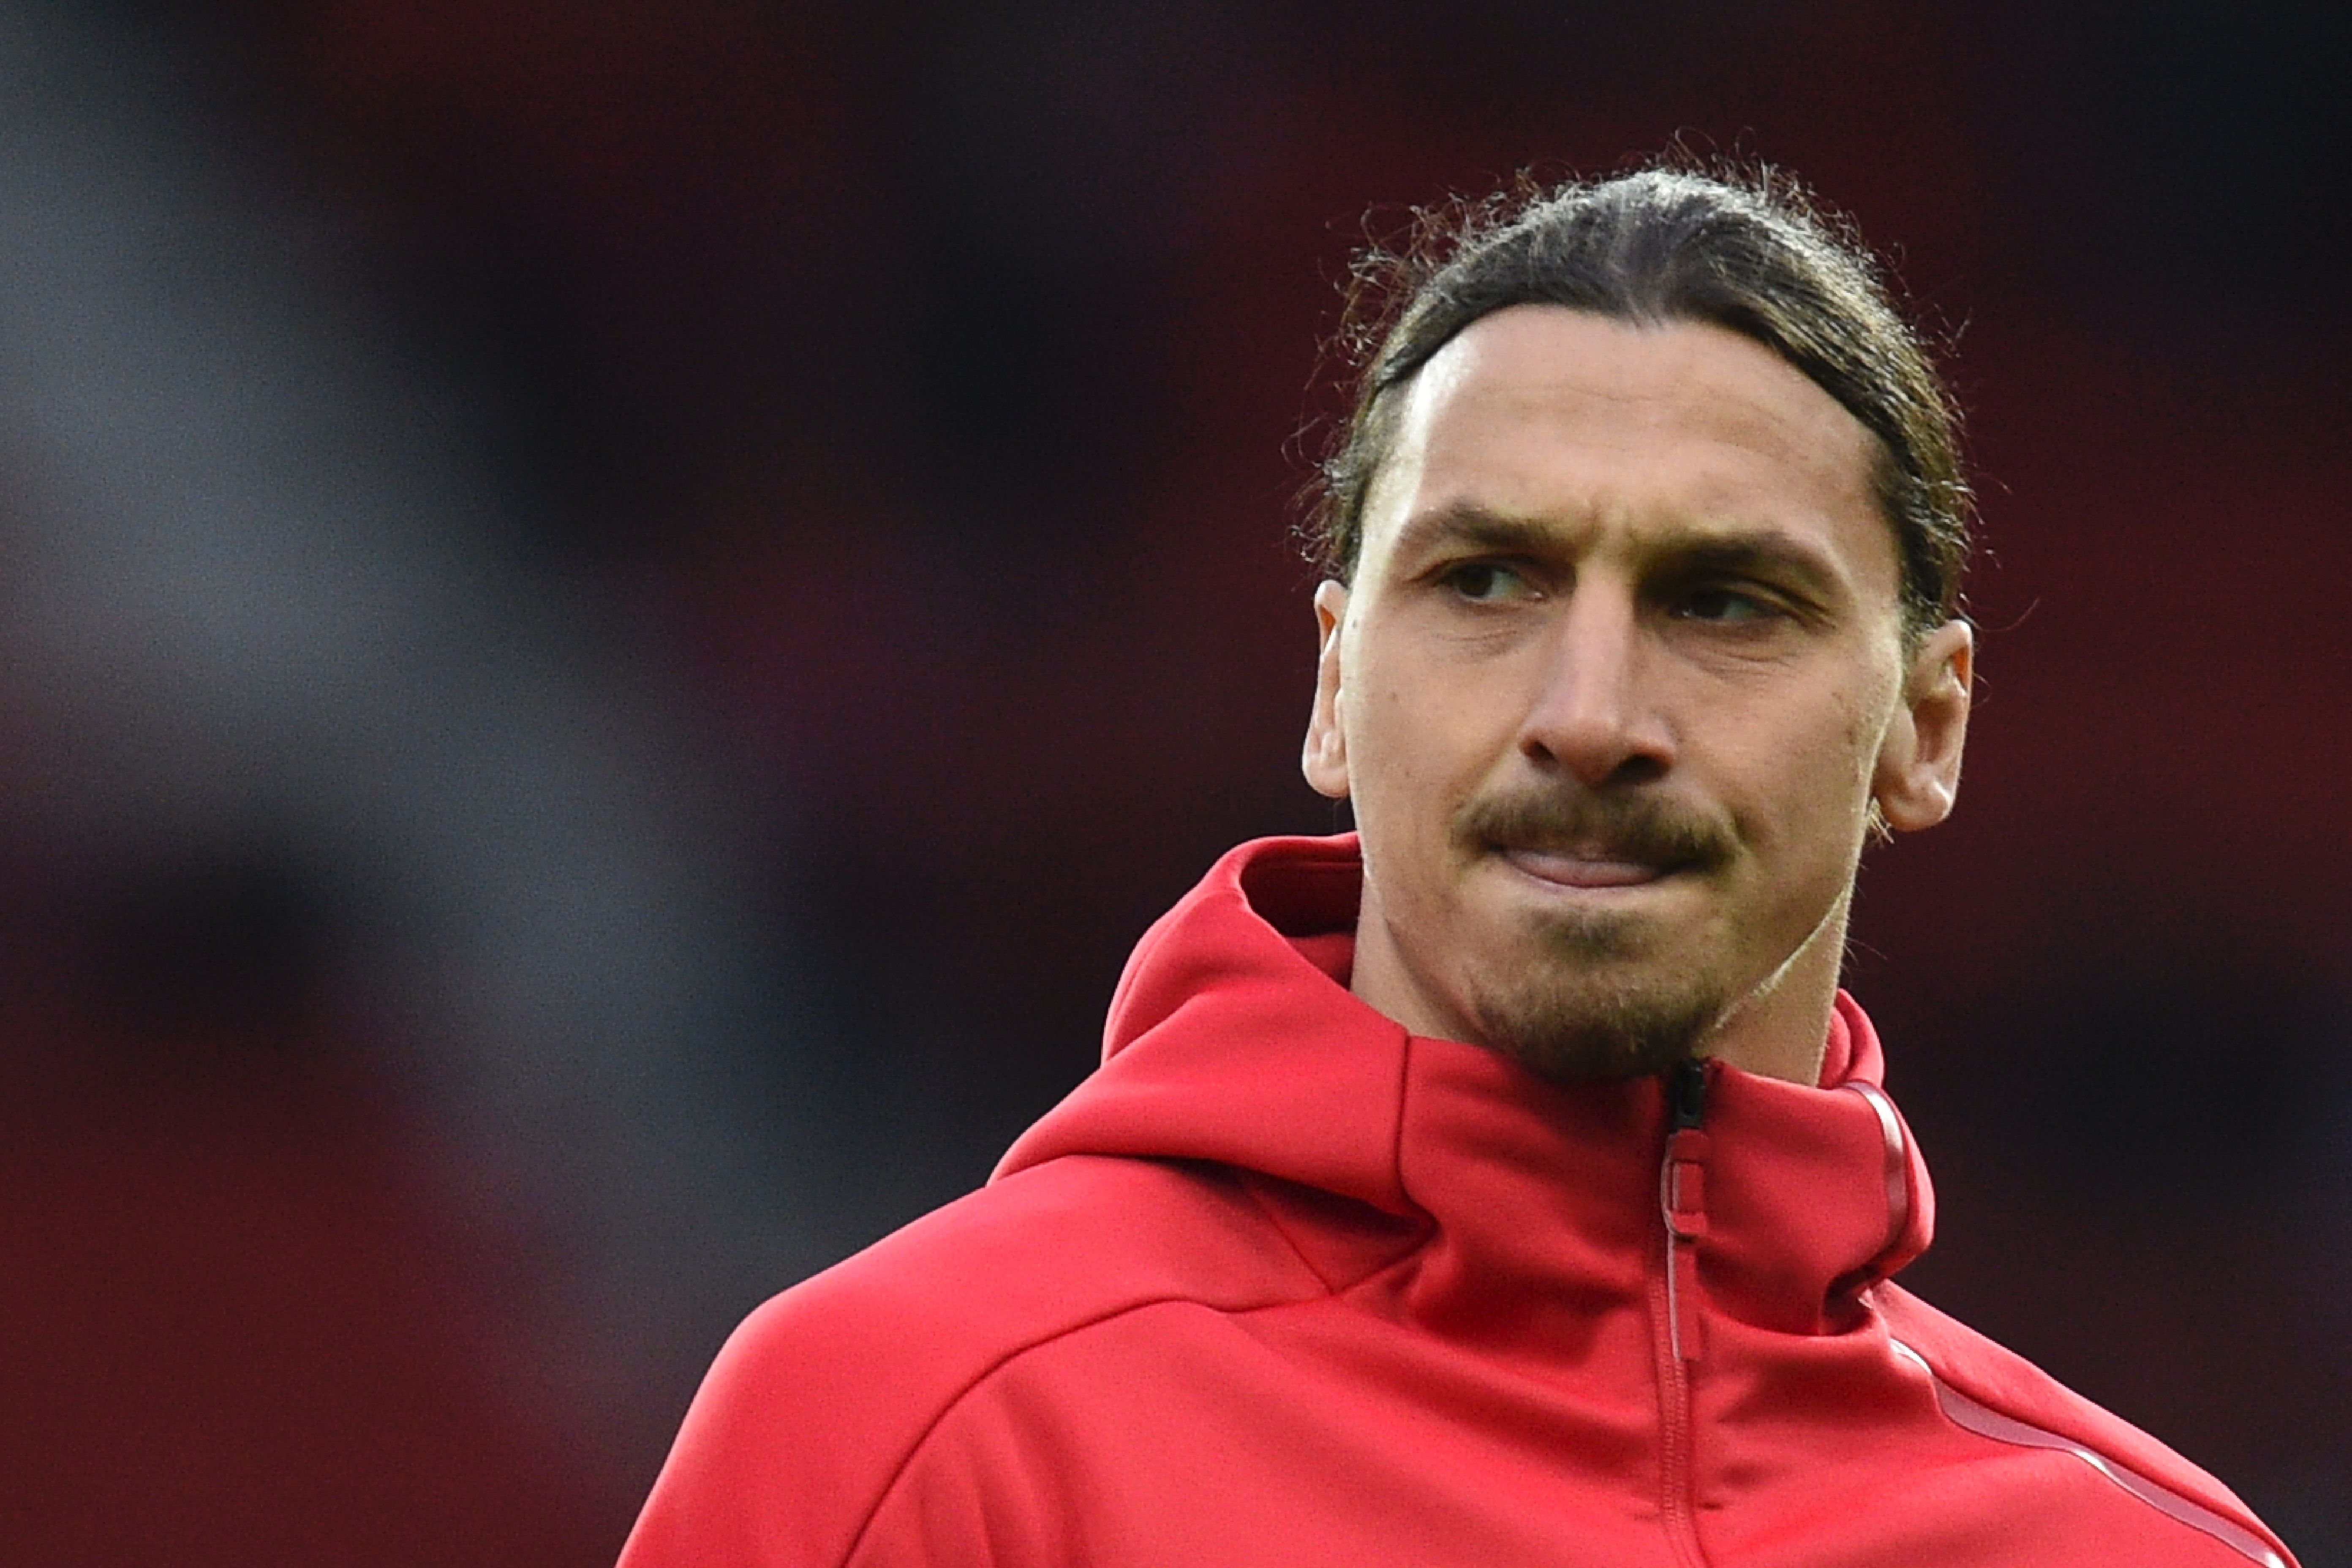 Manchester United's Swedish striker Zlatan Ibrahimovic warms up before the UEFA Europa League quarter-final second leg football match between Manchester United and Anderlecht at Old Trafford in Manchester, north west England, on April 20, 2017. / AFP PHOTO / Oli SCARFF        (Photo credit should read OLI SCARFF/AFP/Getty Images)